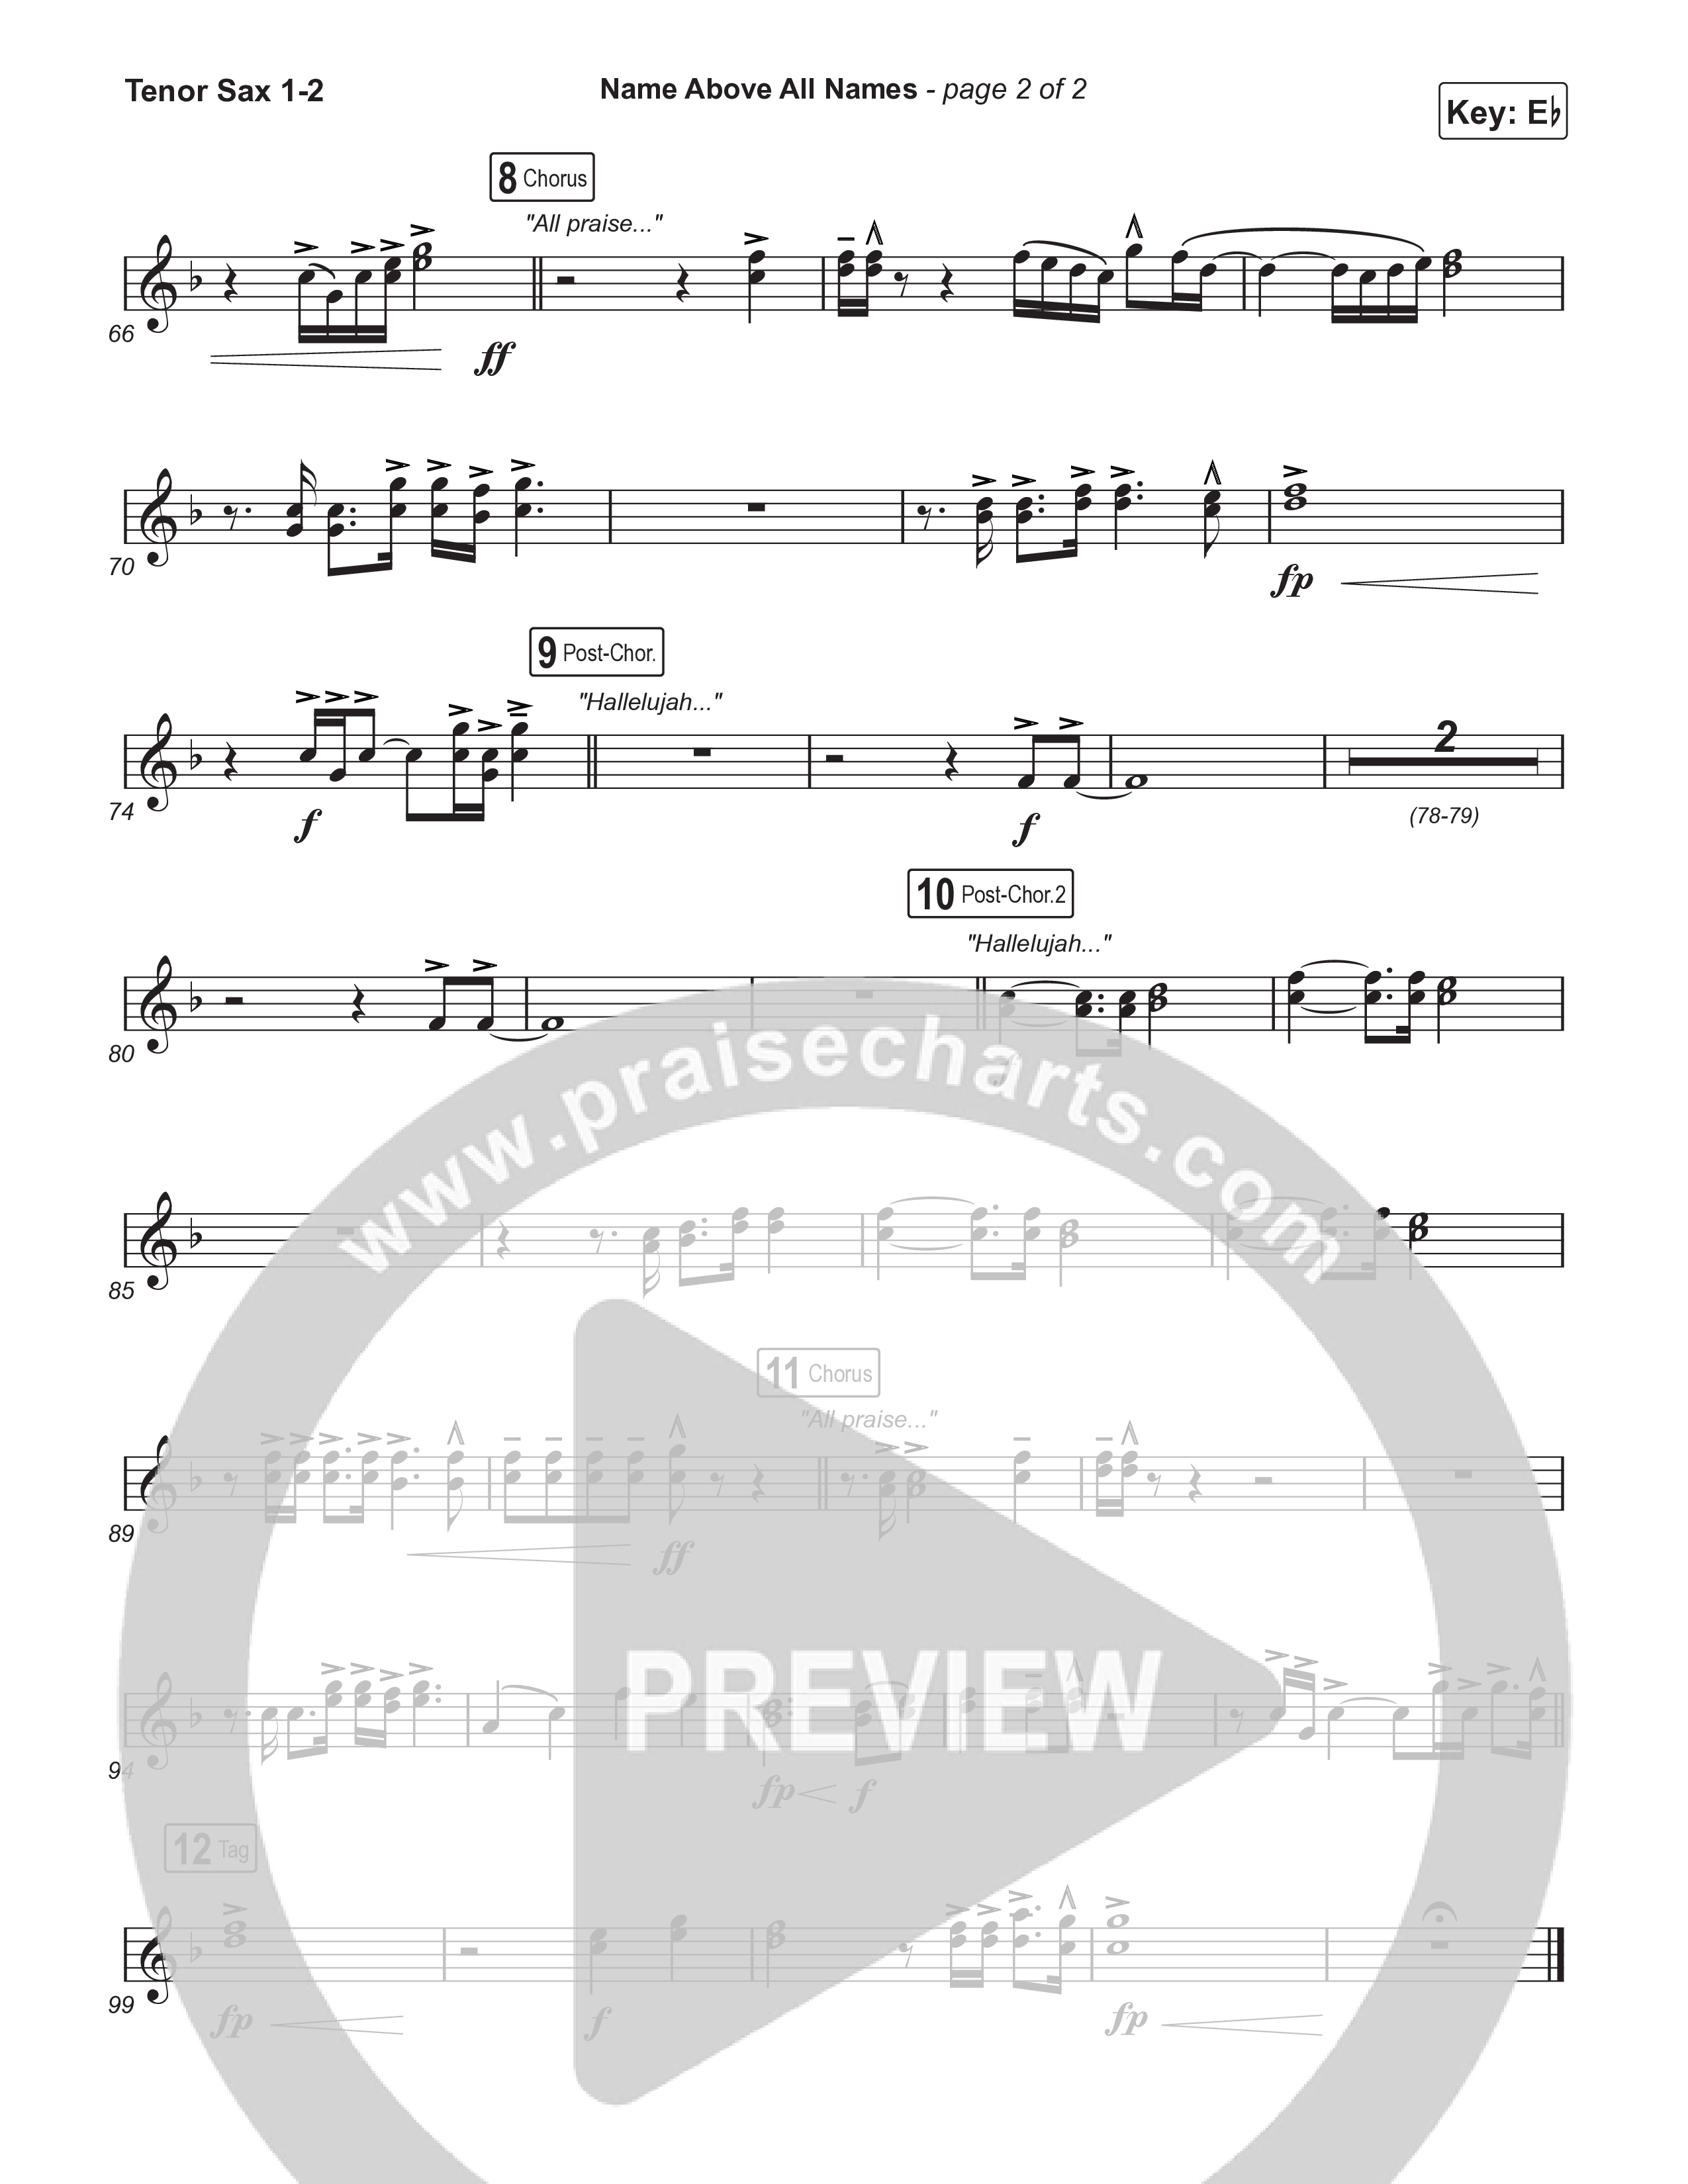 Name Above All Names (Choral Anthem SATB) Tenor Sax 1,2 (Charity Gayle / Arr. Luke Gambill)